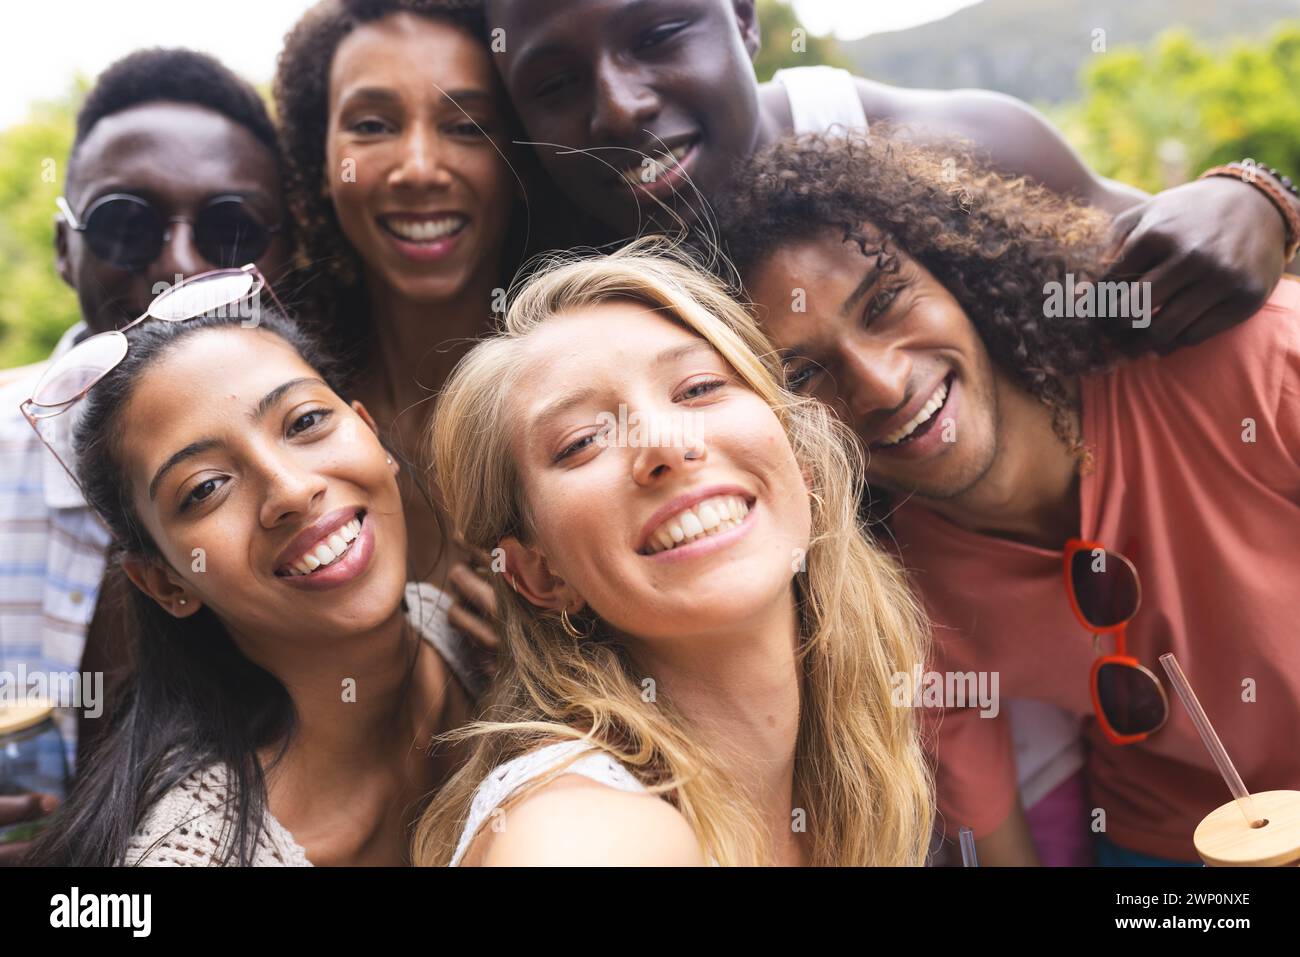 Diverse group of friends smiling for a selfie, showcasing joy and camaraderie Stock Photo